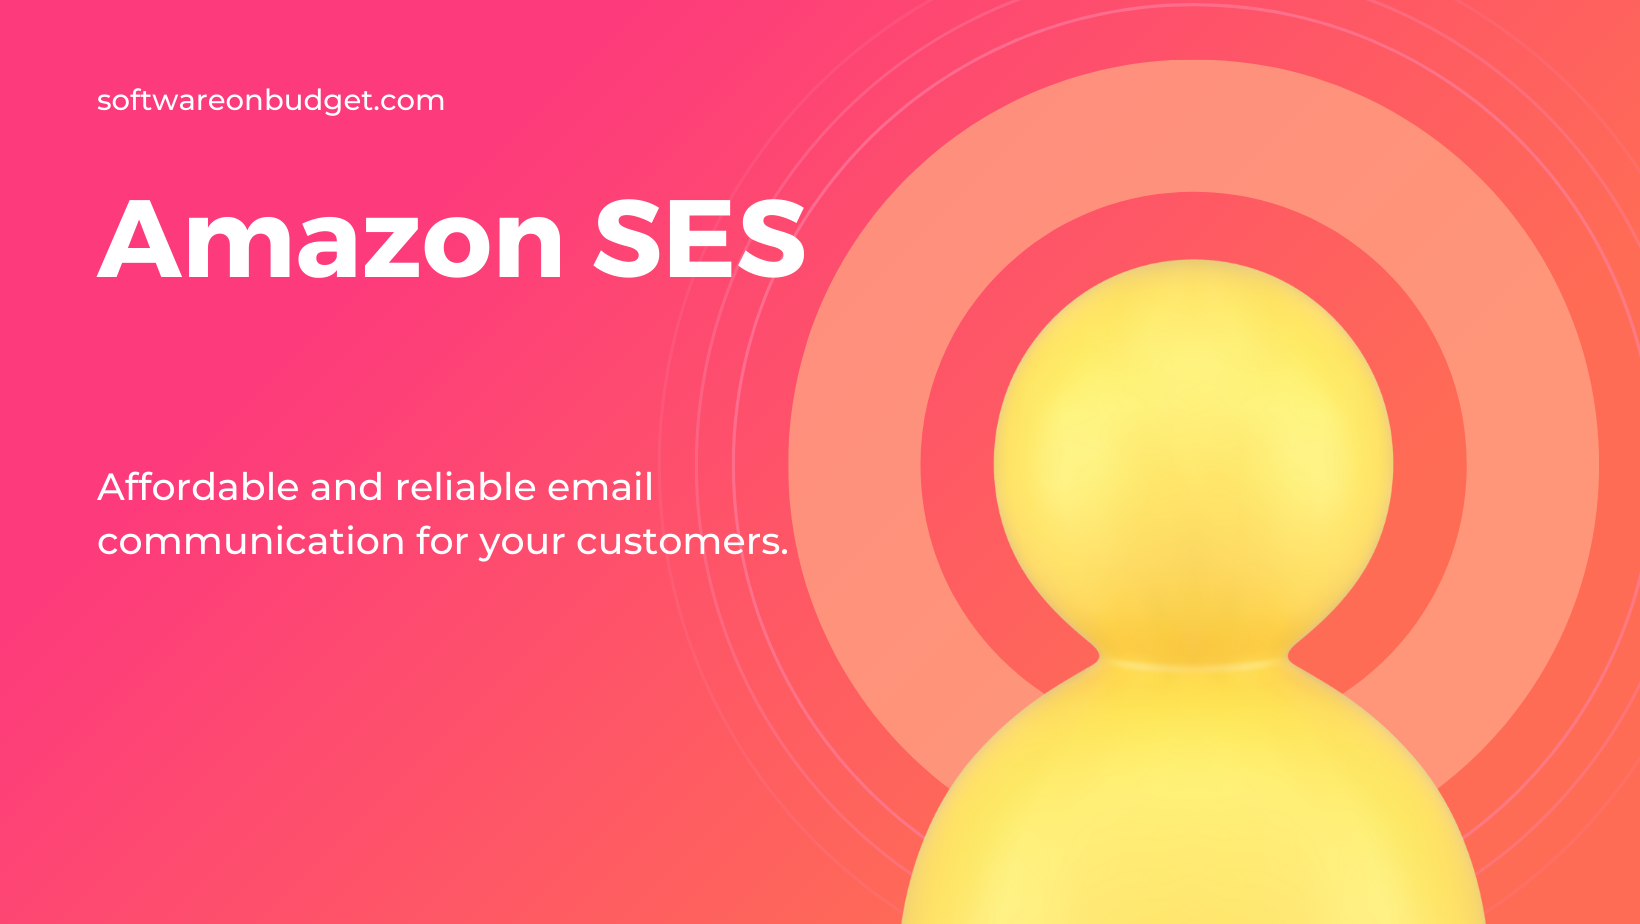 Aws SES - Amazon Simple Email Service